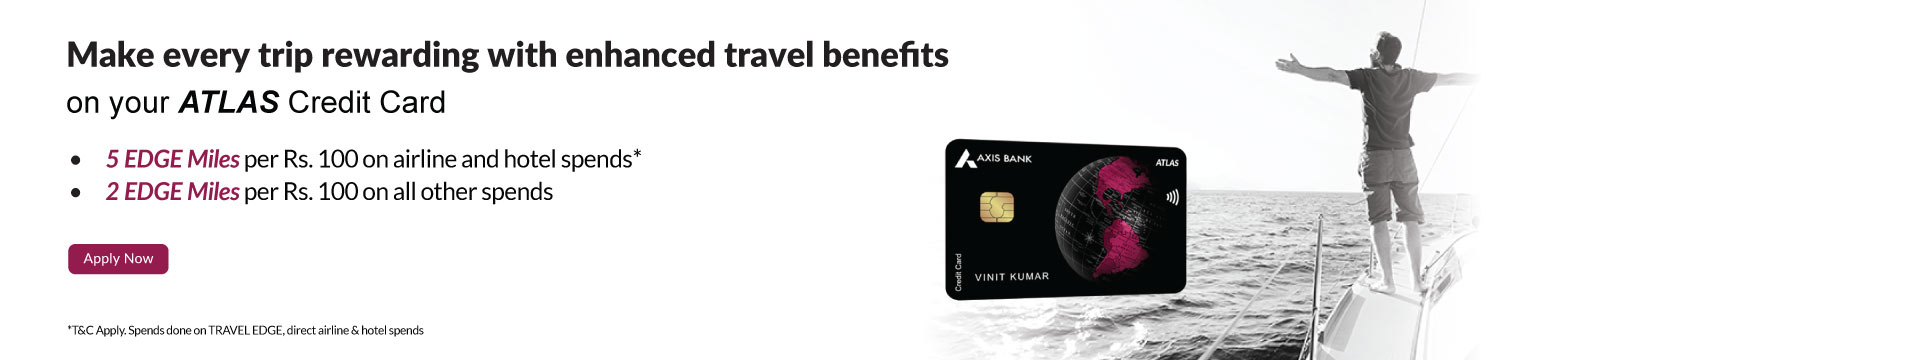 Apply for Axis Bank atlas Credit Cards